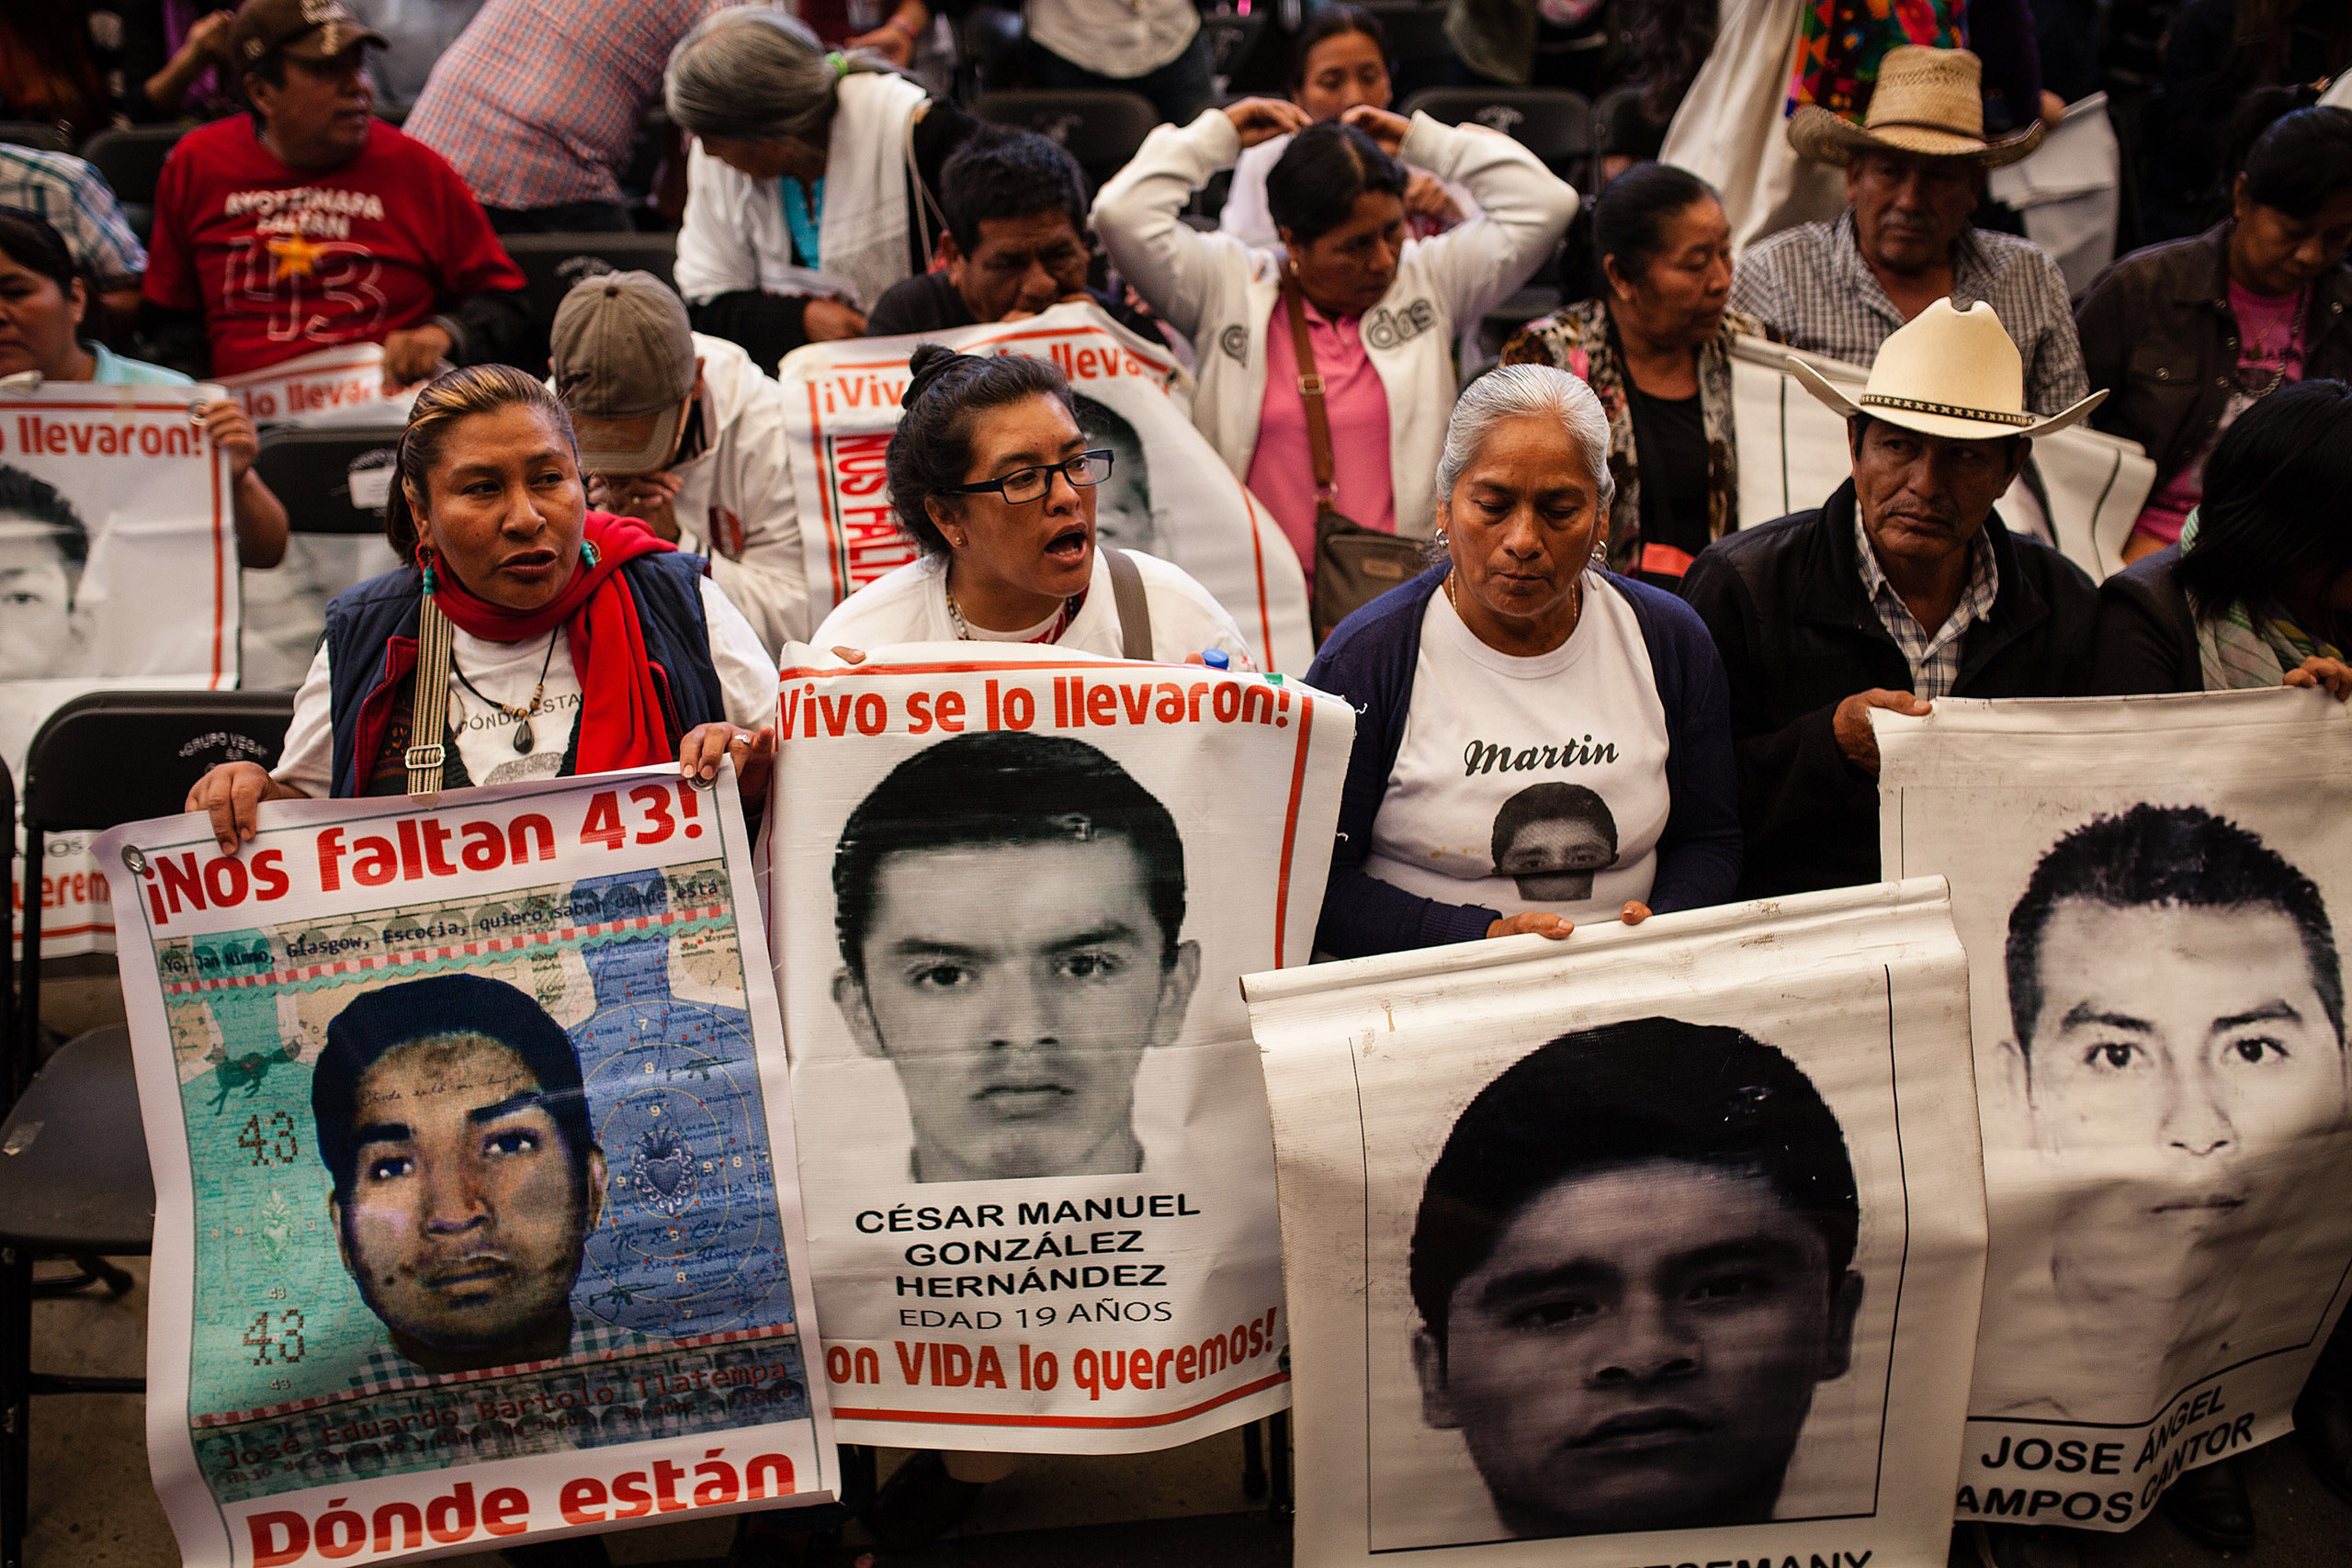 Relatives of the 43 missing students in Ayotzinapa stage a protest during the news conference of the Interdisciplinary Group of Independent Experts to publicize details of the report about the disappearances in Mexico City, Mexico, April 24, 2016. (Manuel Velasquez—Anadolu Agency/Getty Images)